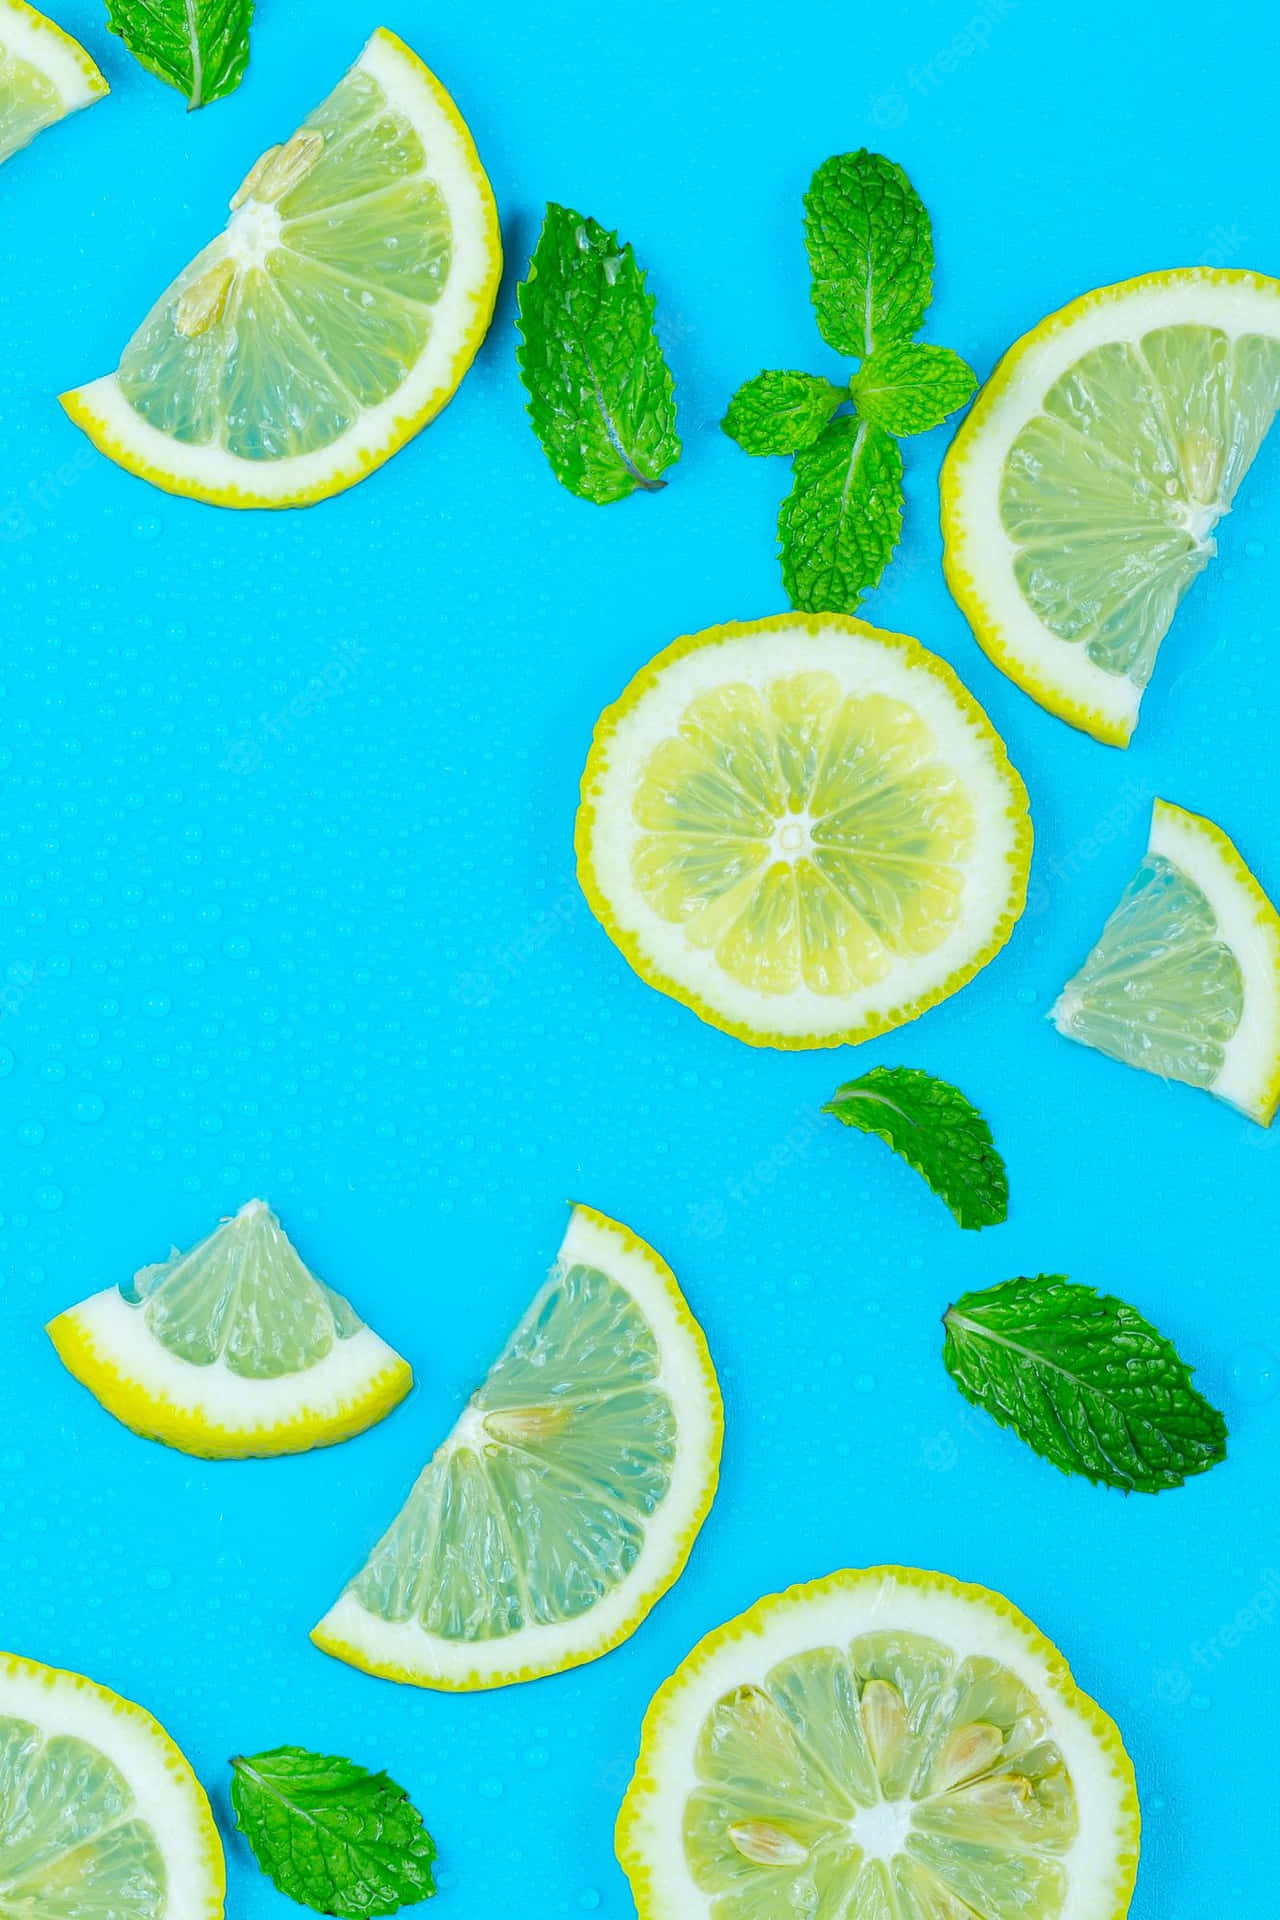 Get a fresh new look for your phone with this Lemon iPhone wallpaper Wallpaper